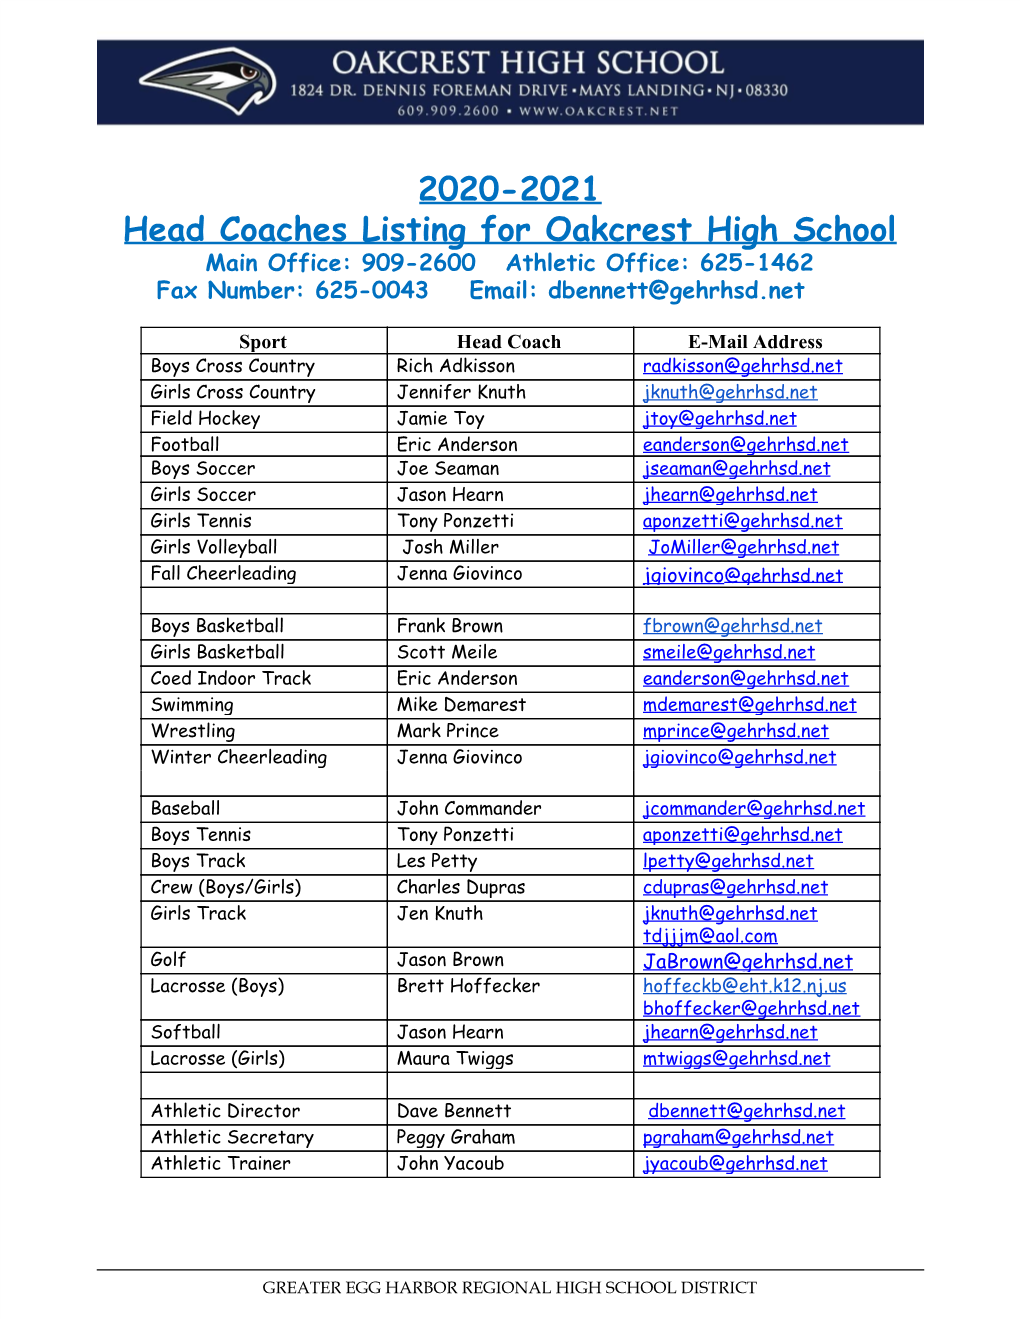 2020-2021 Head Coaches Listing for Oakcrest High School Main Office: 909-2600 Athletic Office: 625-1462 Fax Number: 625-0043 Email: Dbennett@Gehrhsd.Net